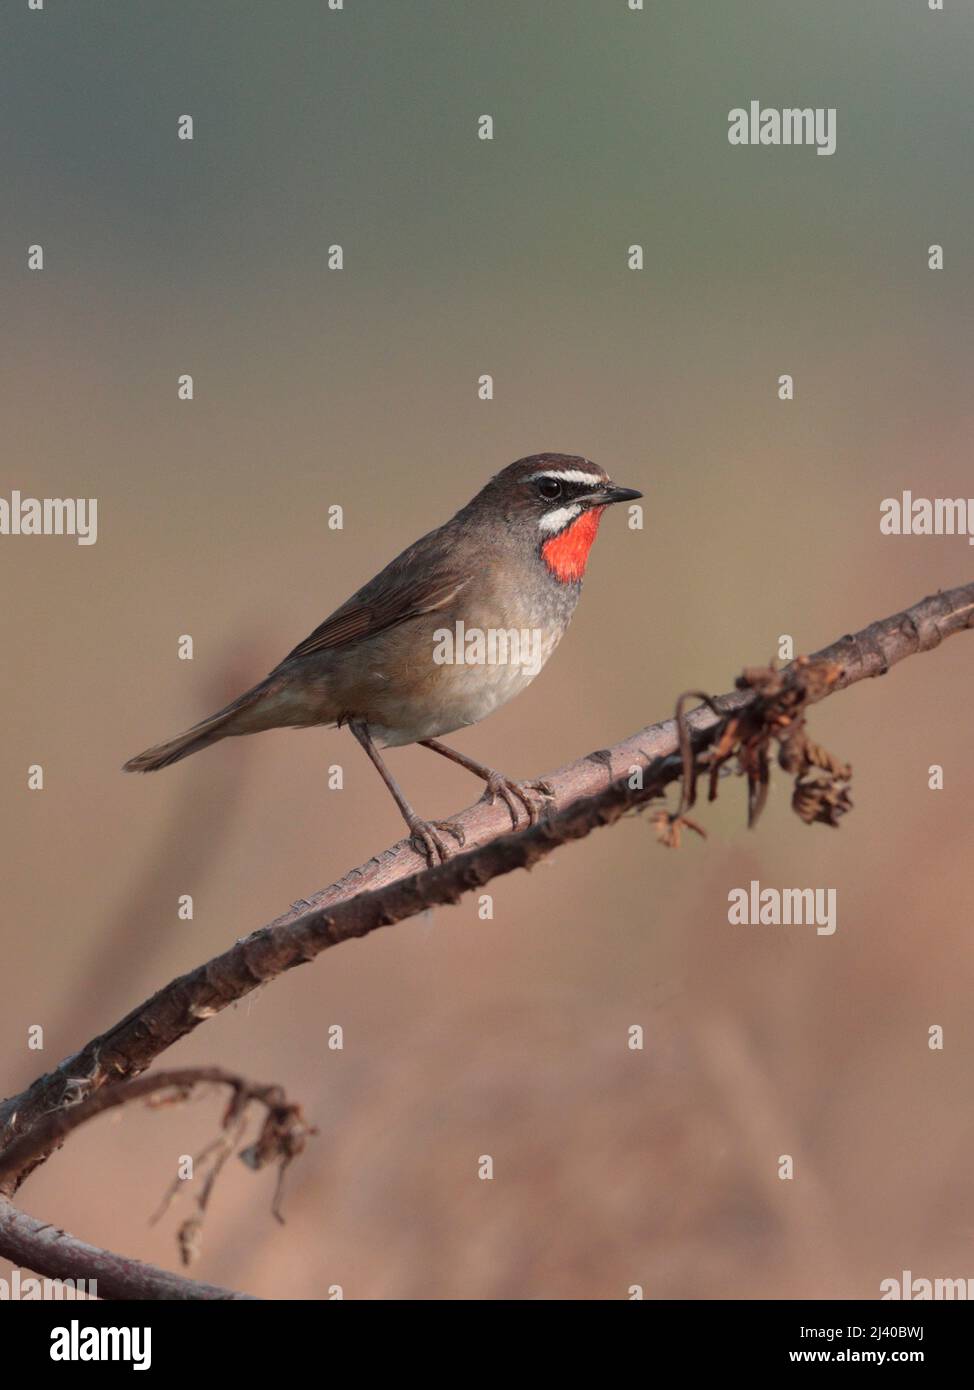 Siberian Rubythroat (Calliope calliope), eye-level view of adult perched on branch, with phragmites reedbed behind, Hong Kong 6th April 2022 Stock Photo